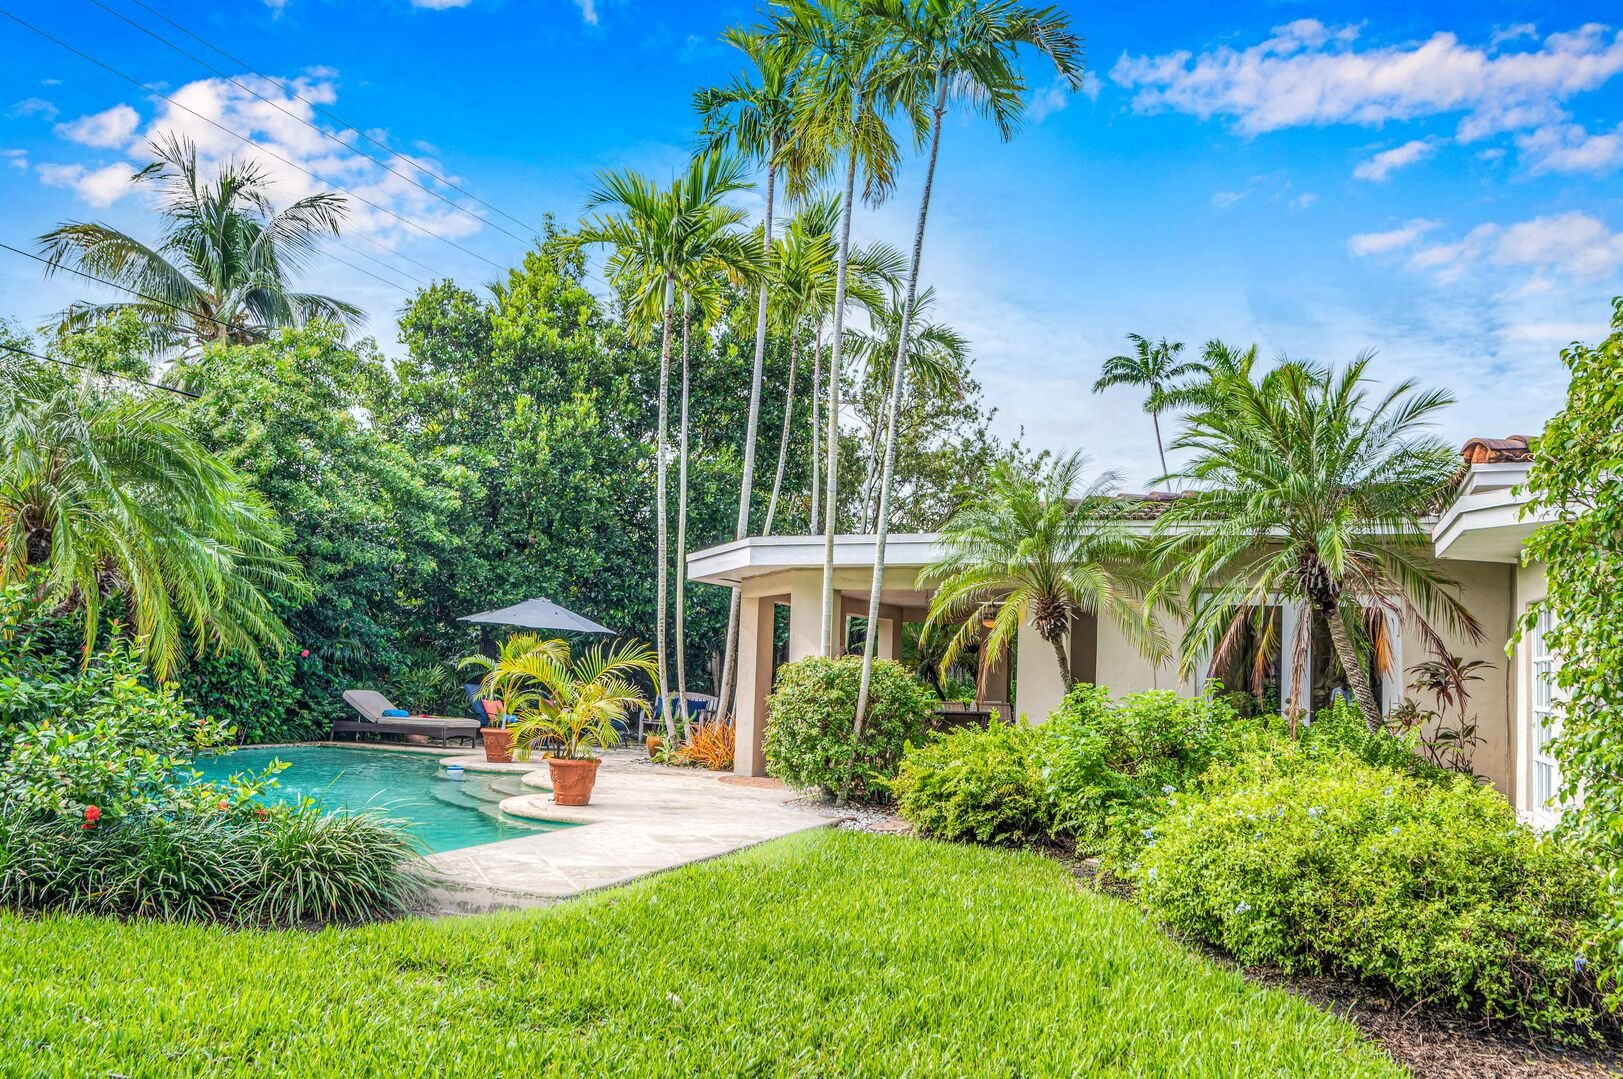 This private tropical oasis is a hidden gem with its heated pool amidst the lush courtyard.